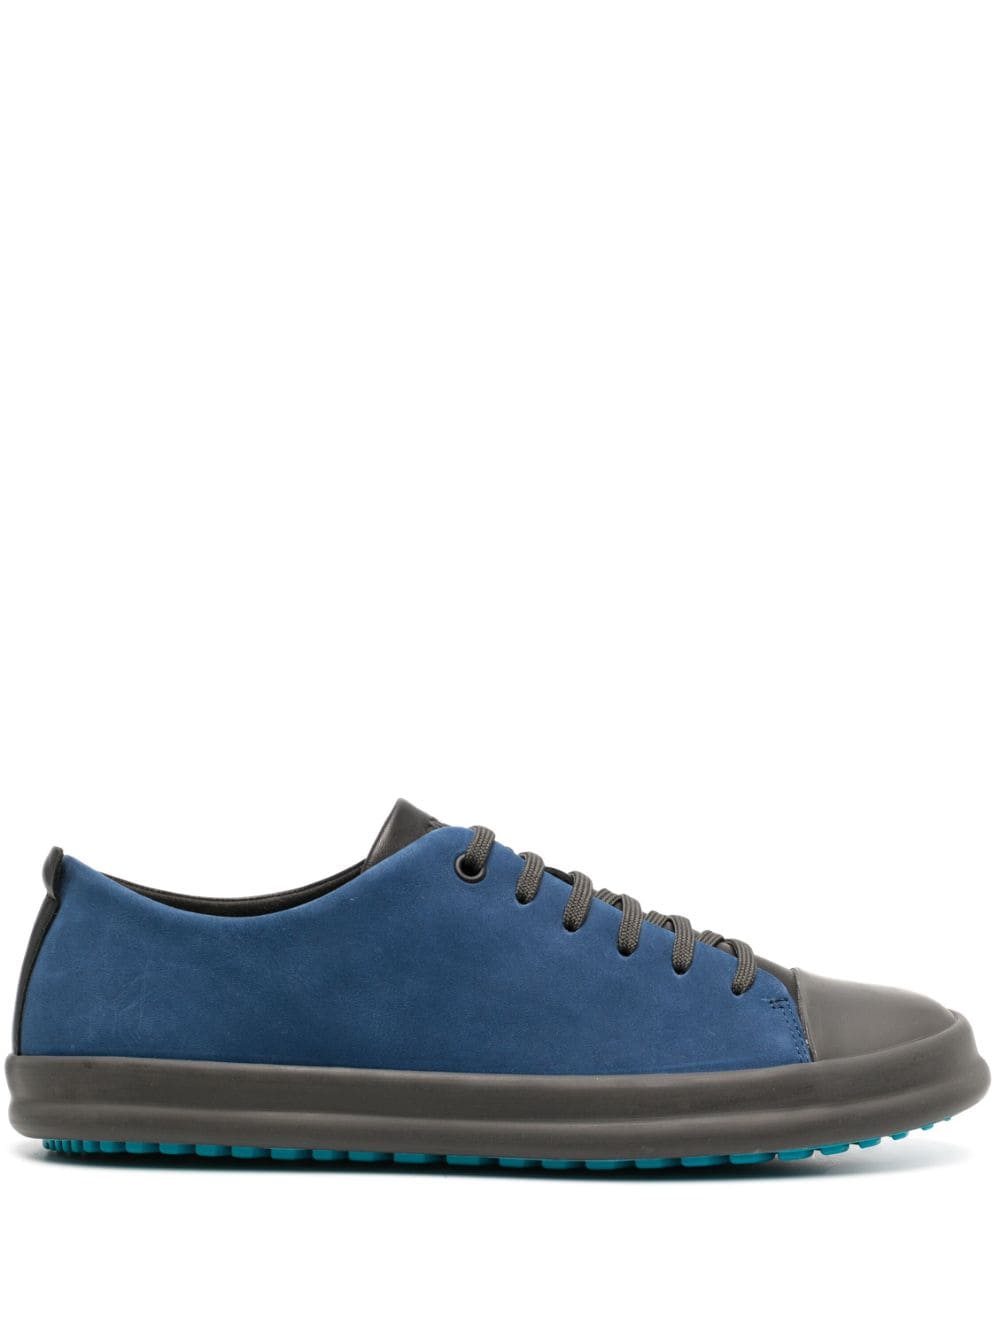 Camper Chasis Twins lace-up sneakers - Blue von Camper